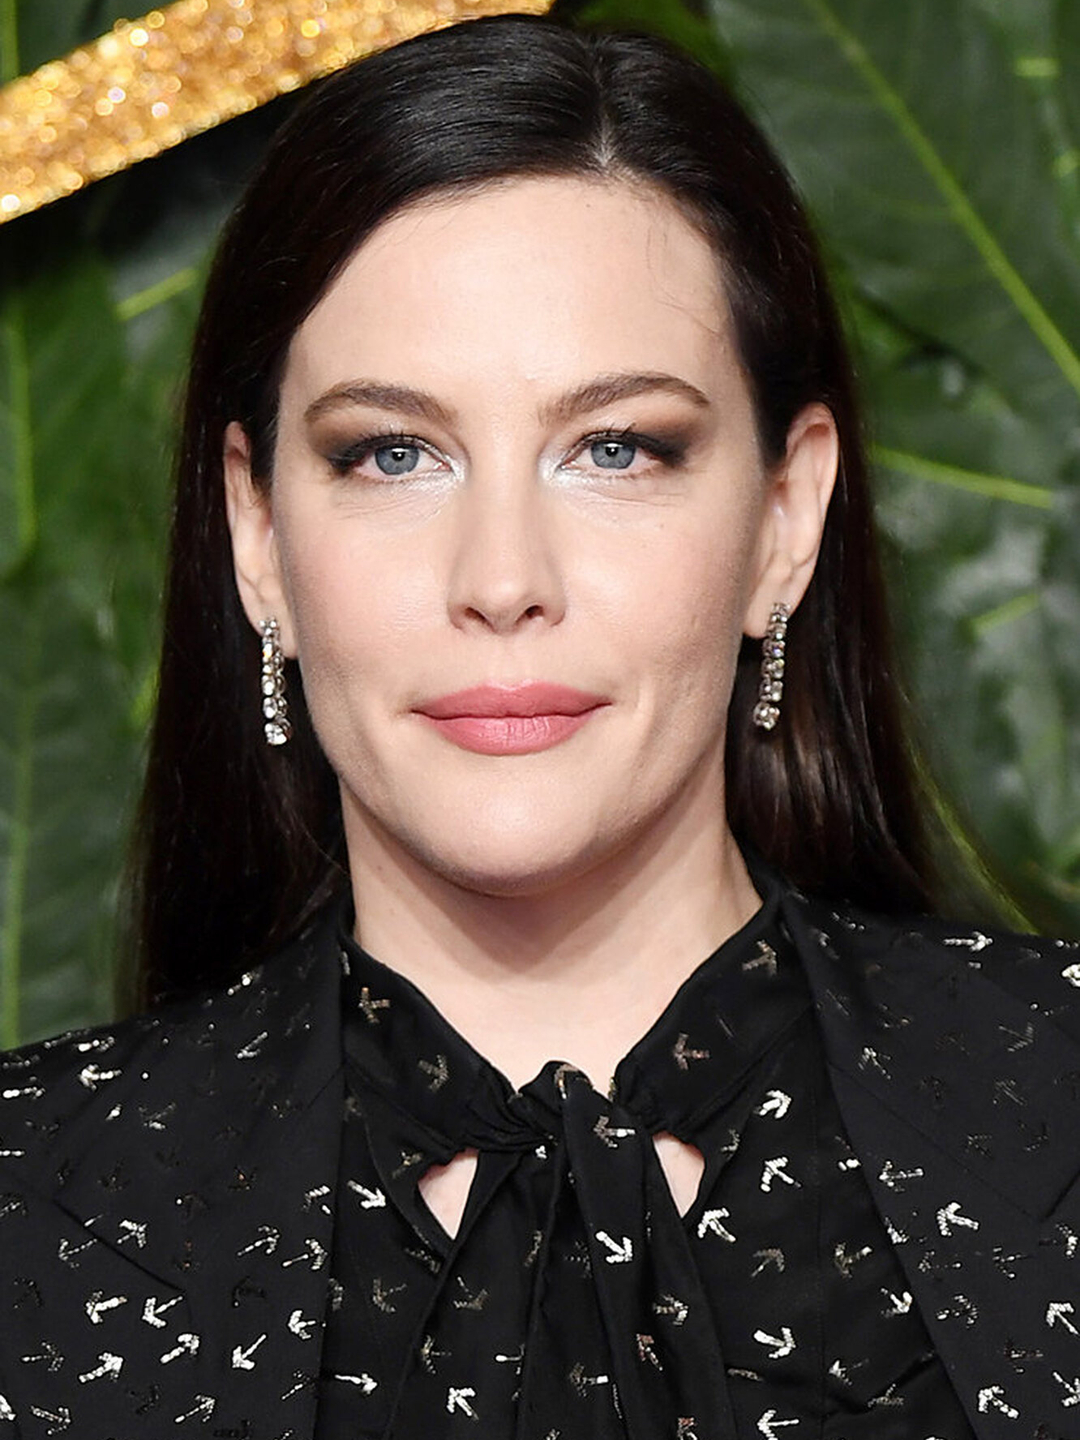 Liv Tyler who is her father